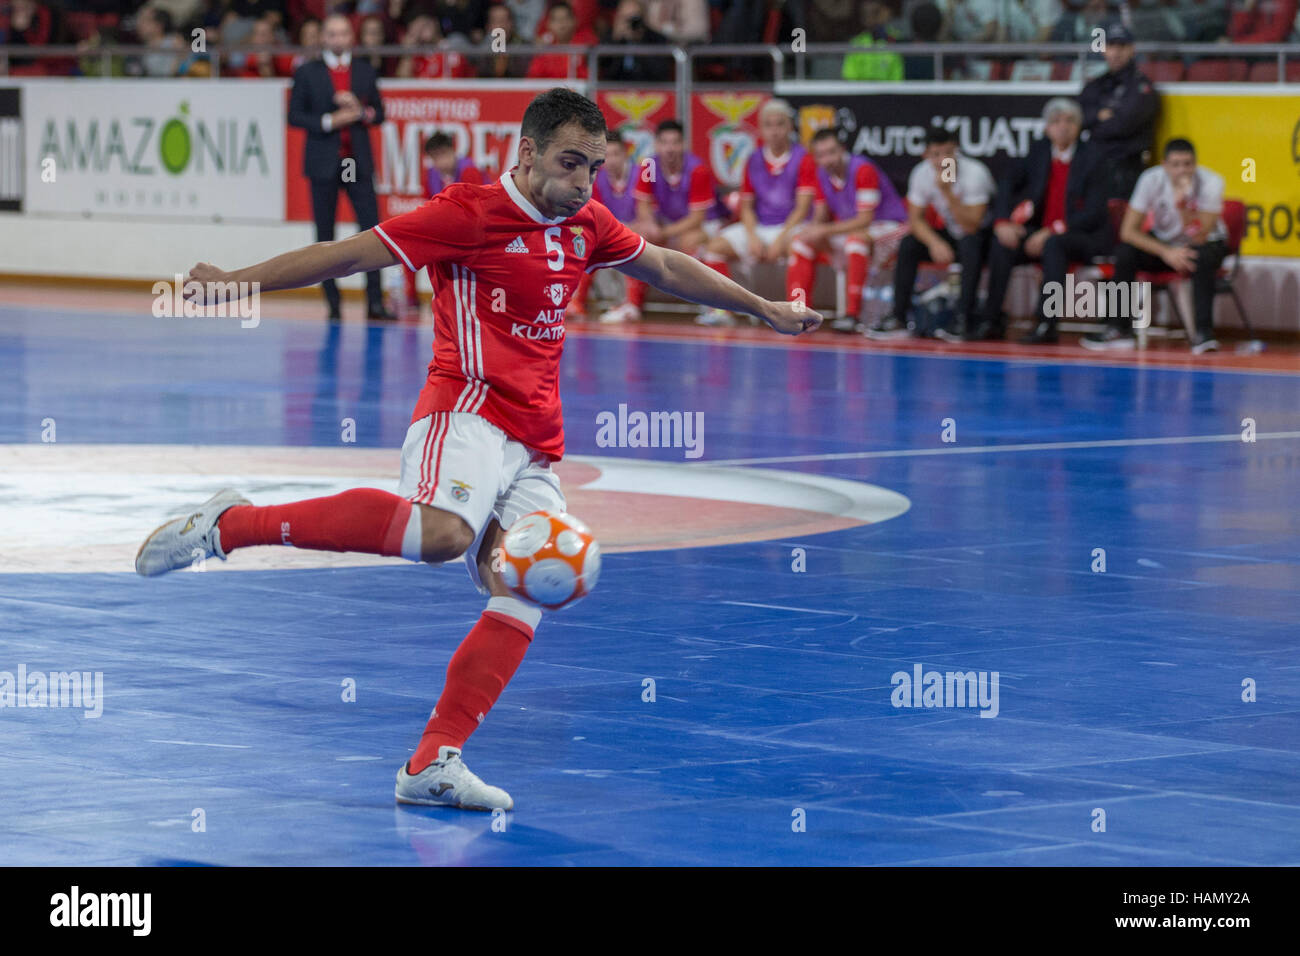 Lisbon, Portugal. 1st December, 2016. Benfica's winger from Portugal Fabio Cecilio (5) in action during the game SL Benfica v CF Os Belenenses Credit:  Alexandre de Sousa/Alamy Live News Stock Photo